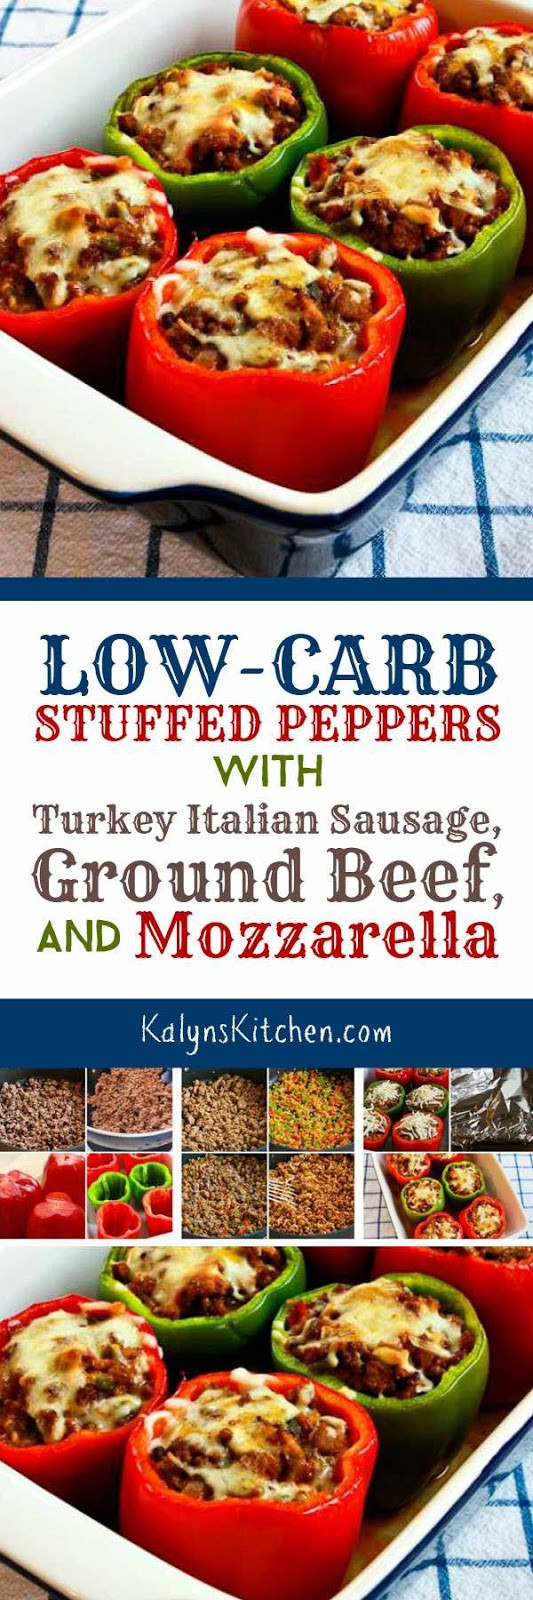 Low Carb Stuffed Peppers With Ground Turkey
 Low Carb Stuffed Peppers with Turkey Italian Sausage